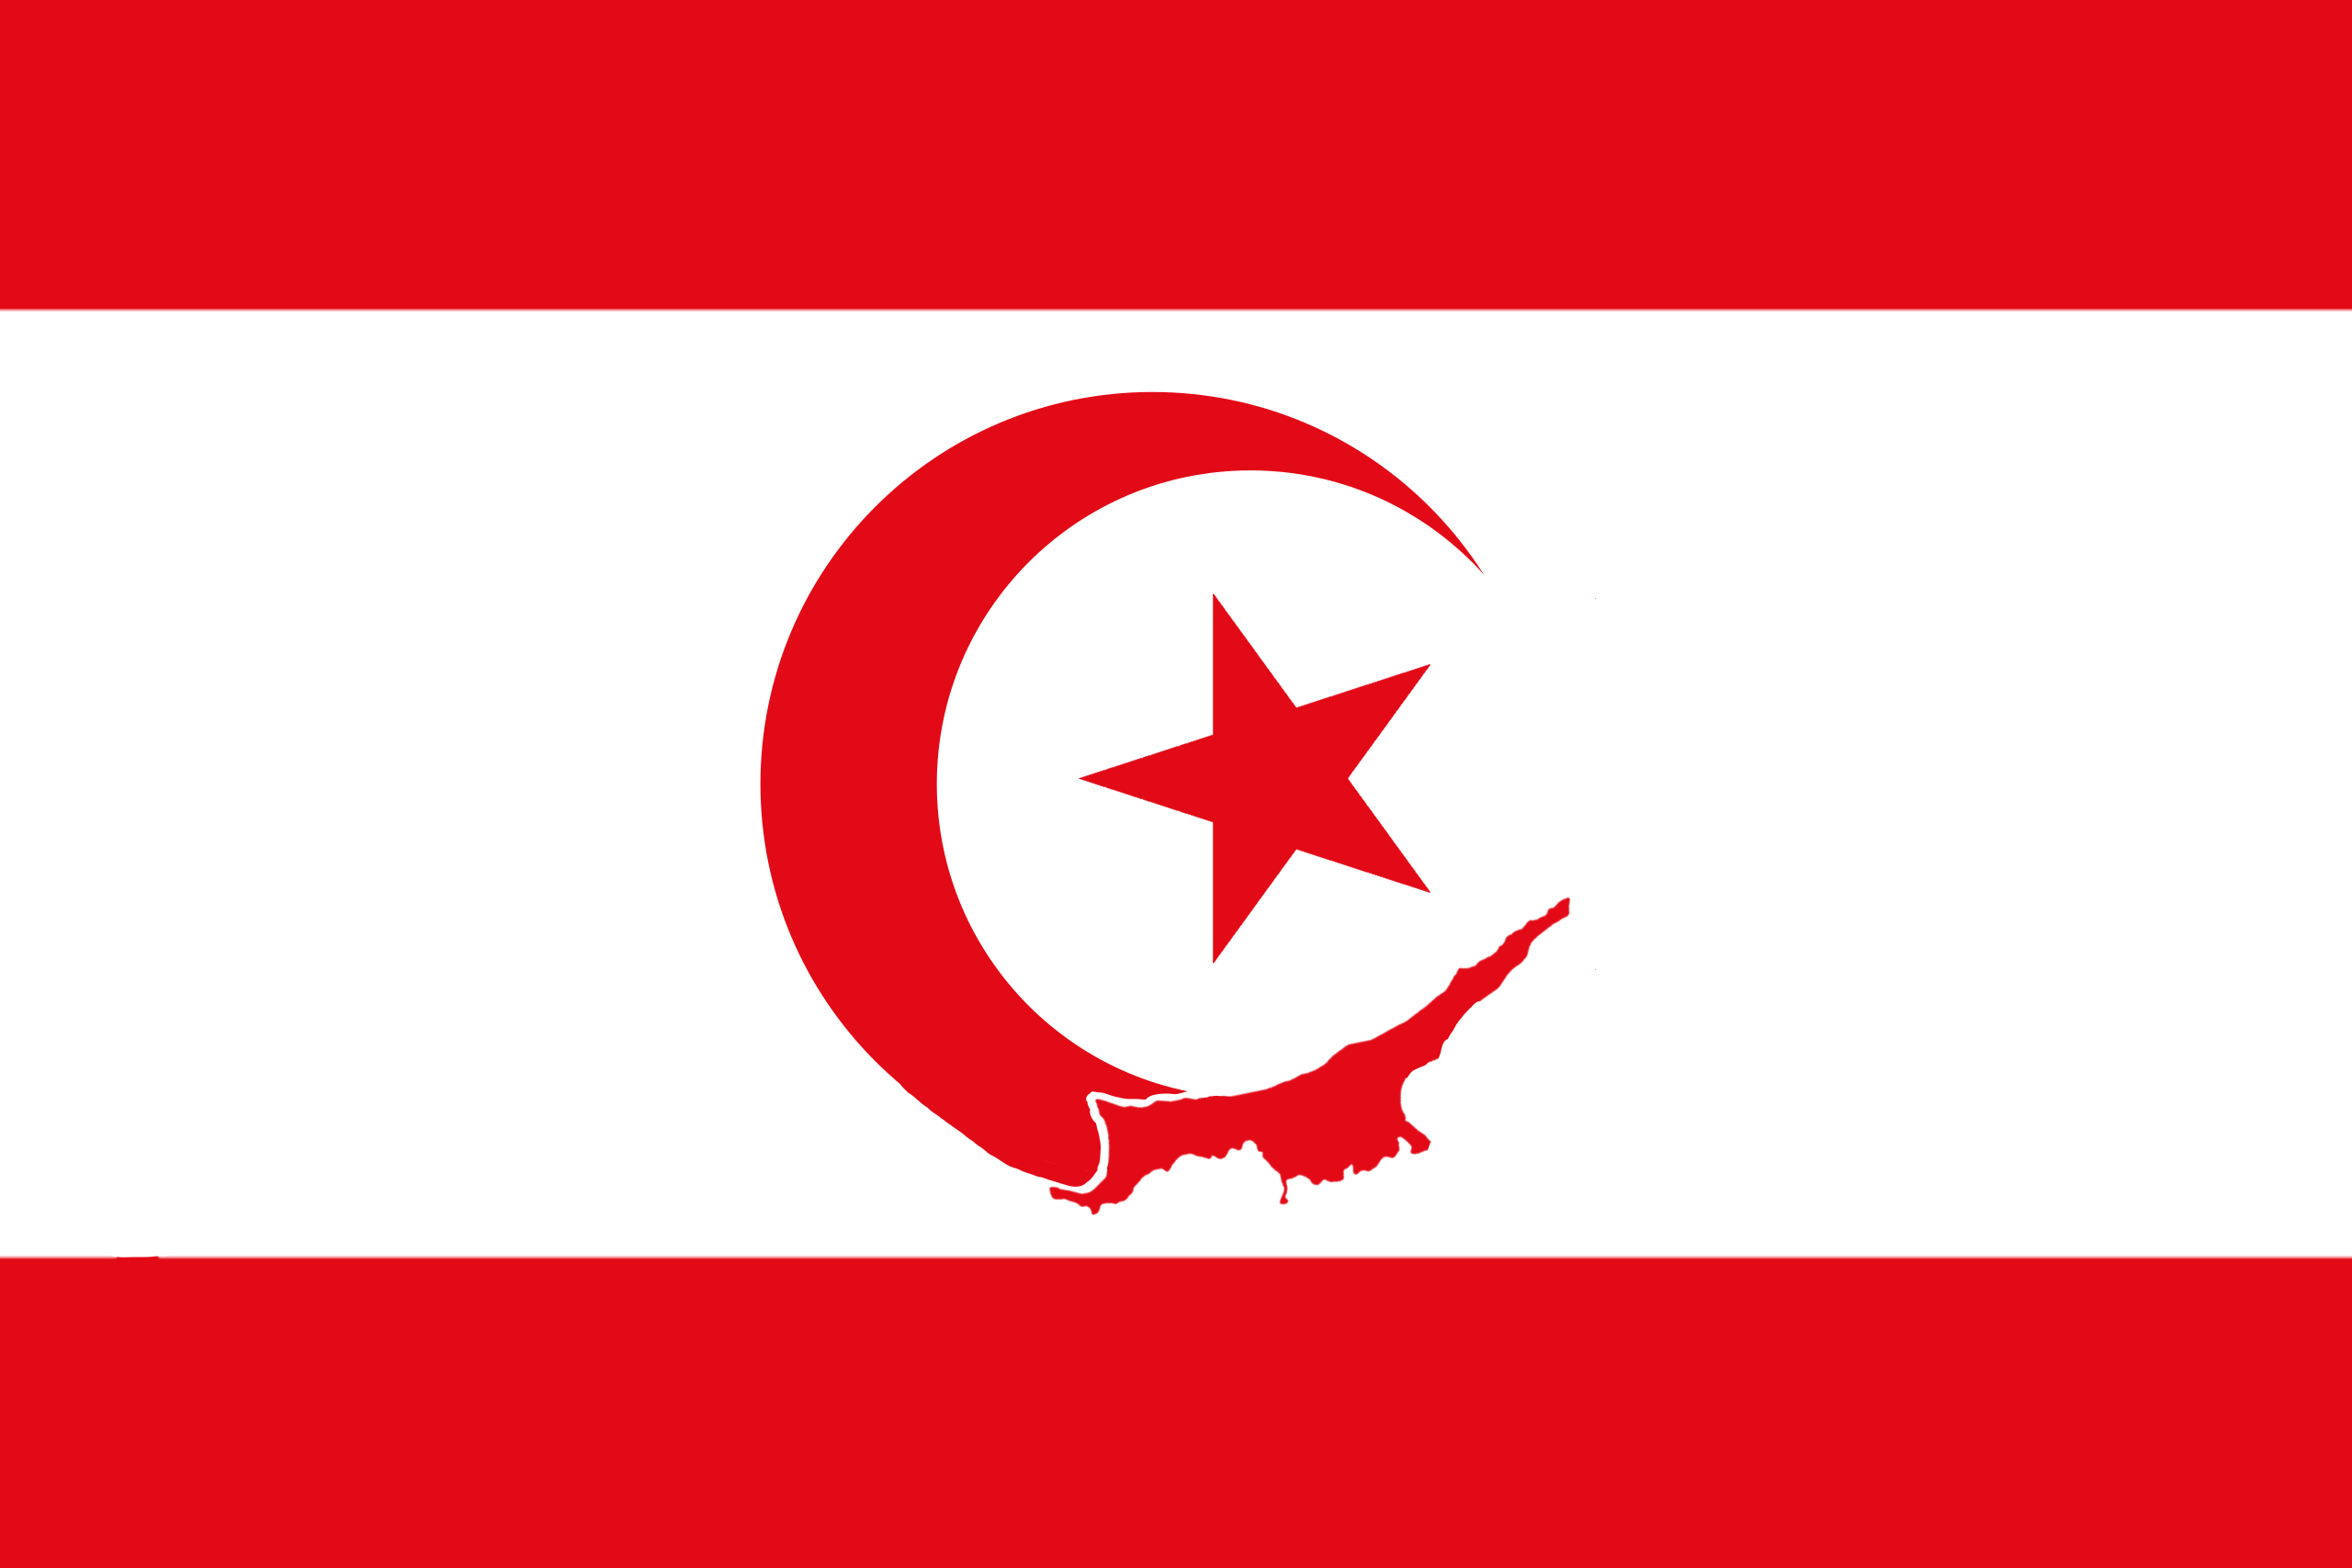 Symbols and meanings behind the flag of Northern Cyprus